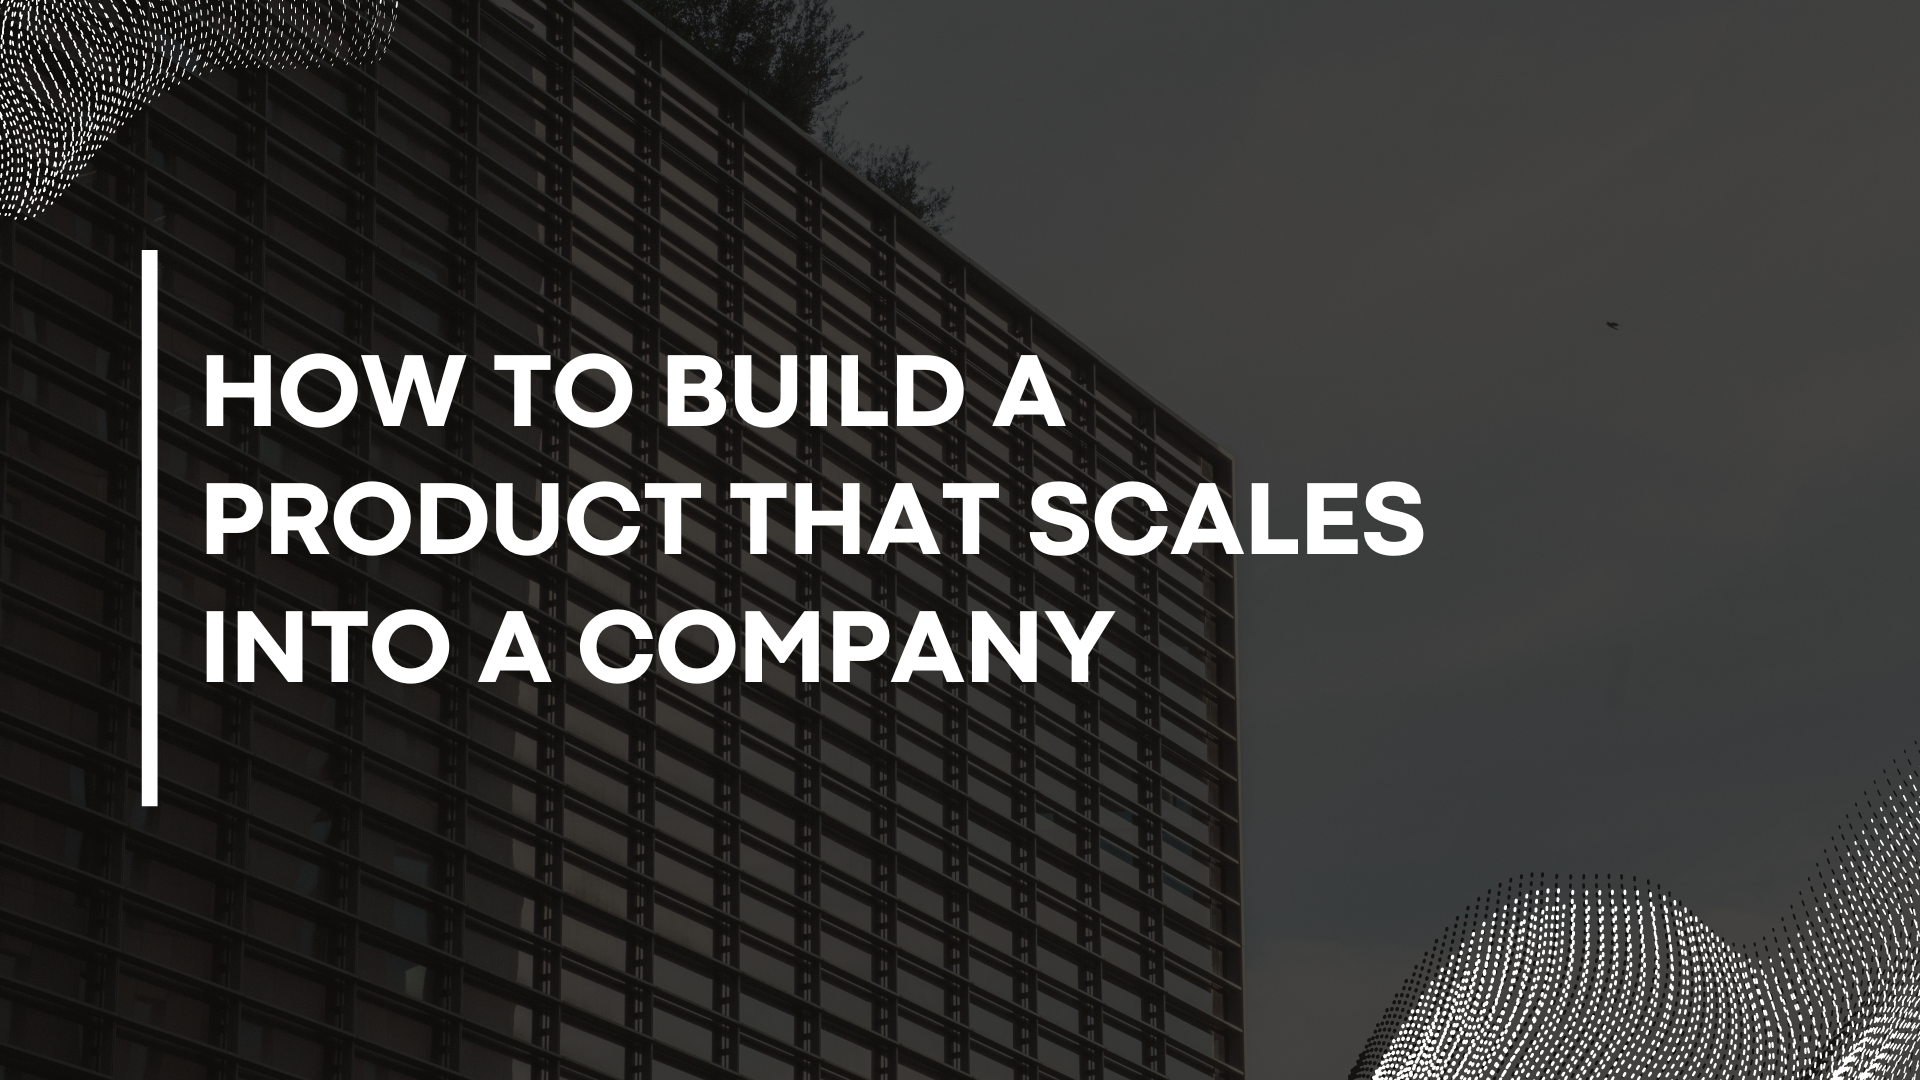 How to Build a Product that Scales into a Company